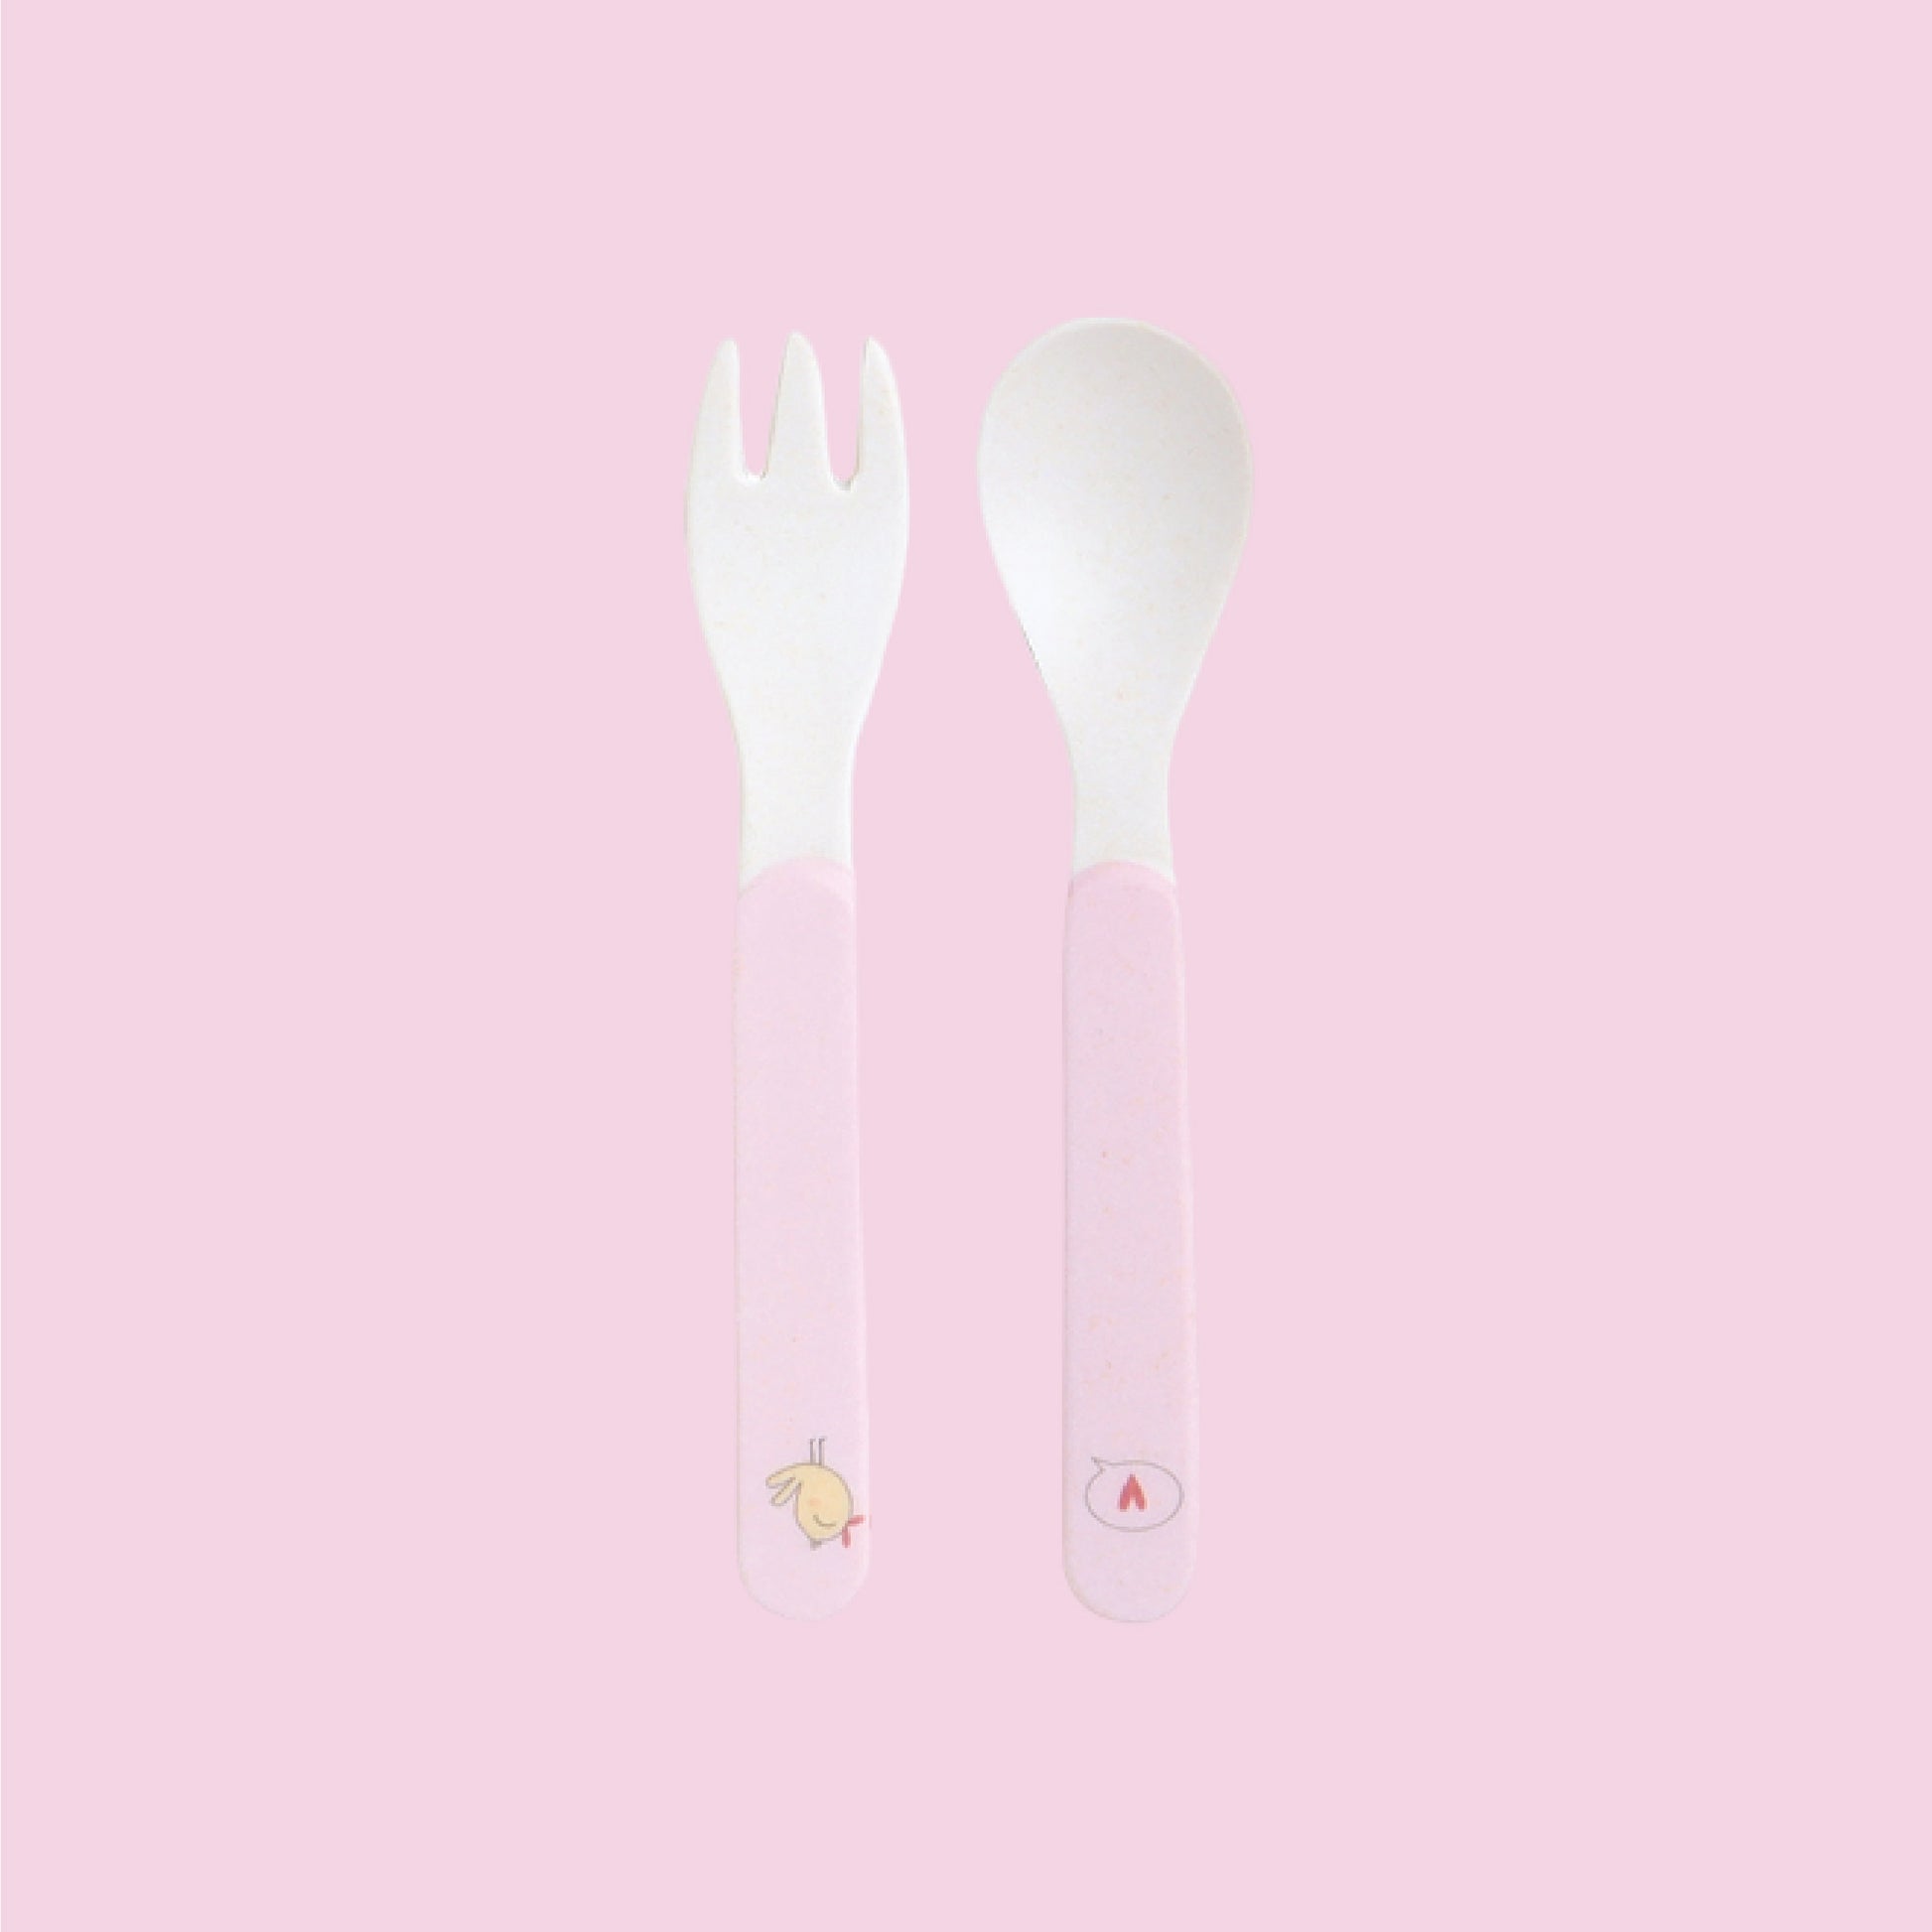 bamboo fork & spoon 